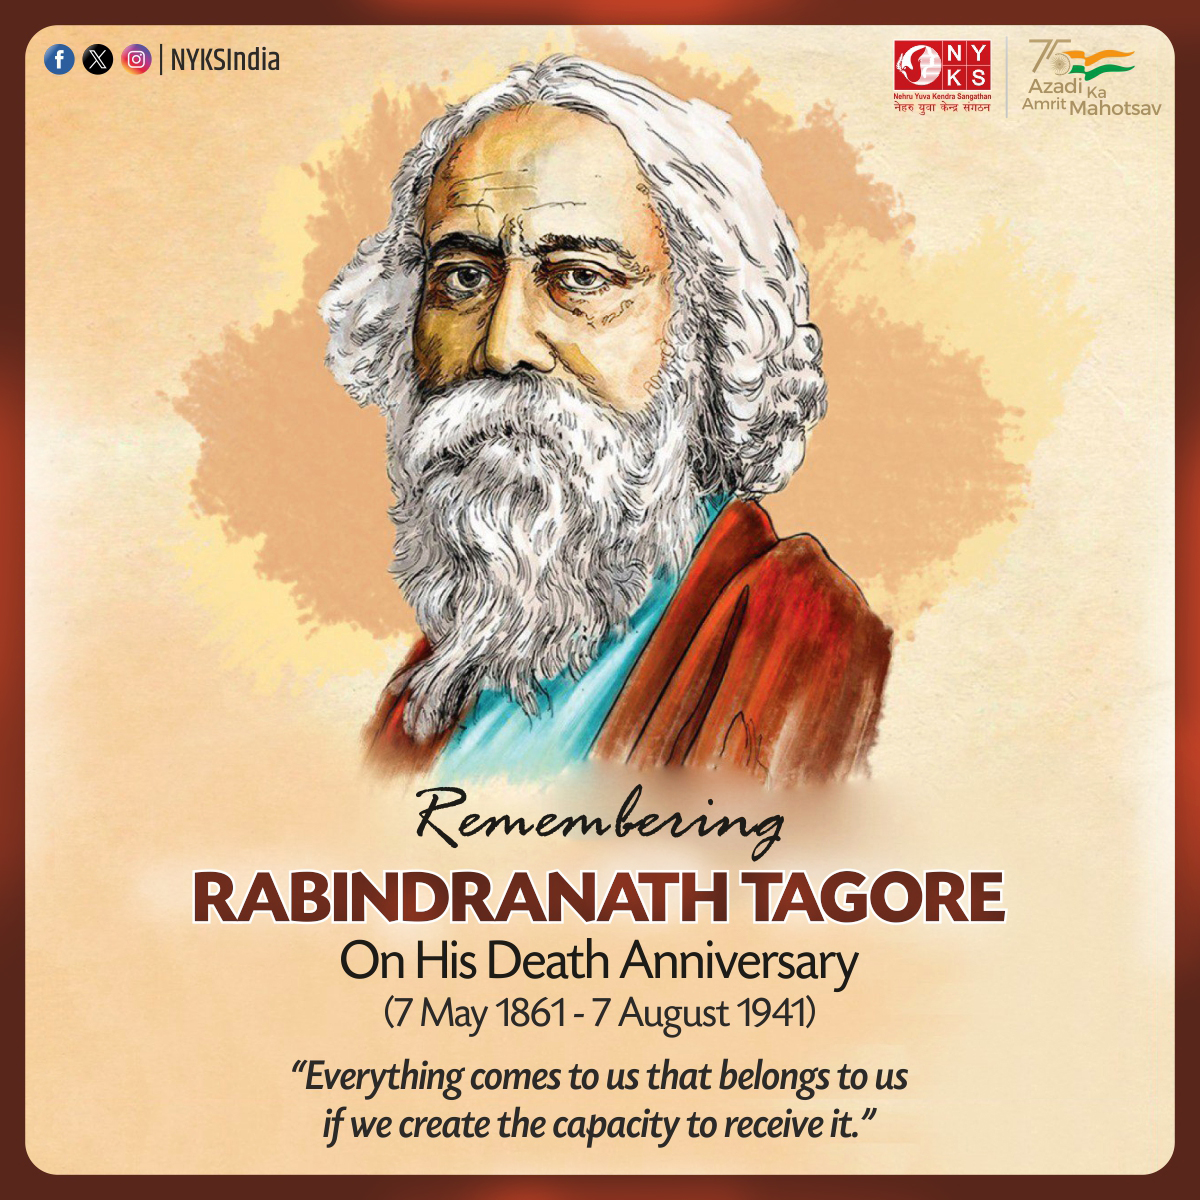 Remembering the Great Bard, Rabindranath Tagore, on his death anniversary. His timeless poetry and profound thoughts continue to inspire generations. Let his words resonate in our hearts forever. 🌸🕊️
 #RabindranathTagore #Tribute #LegacyOfInspiration #youth #India